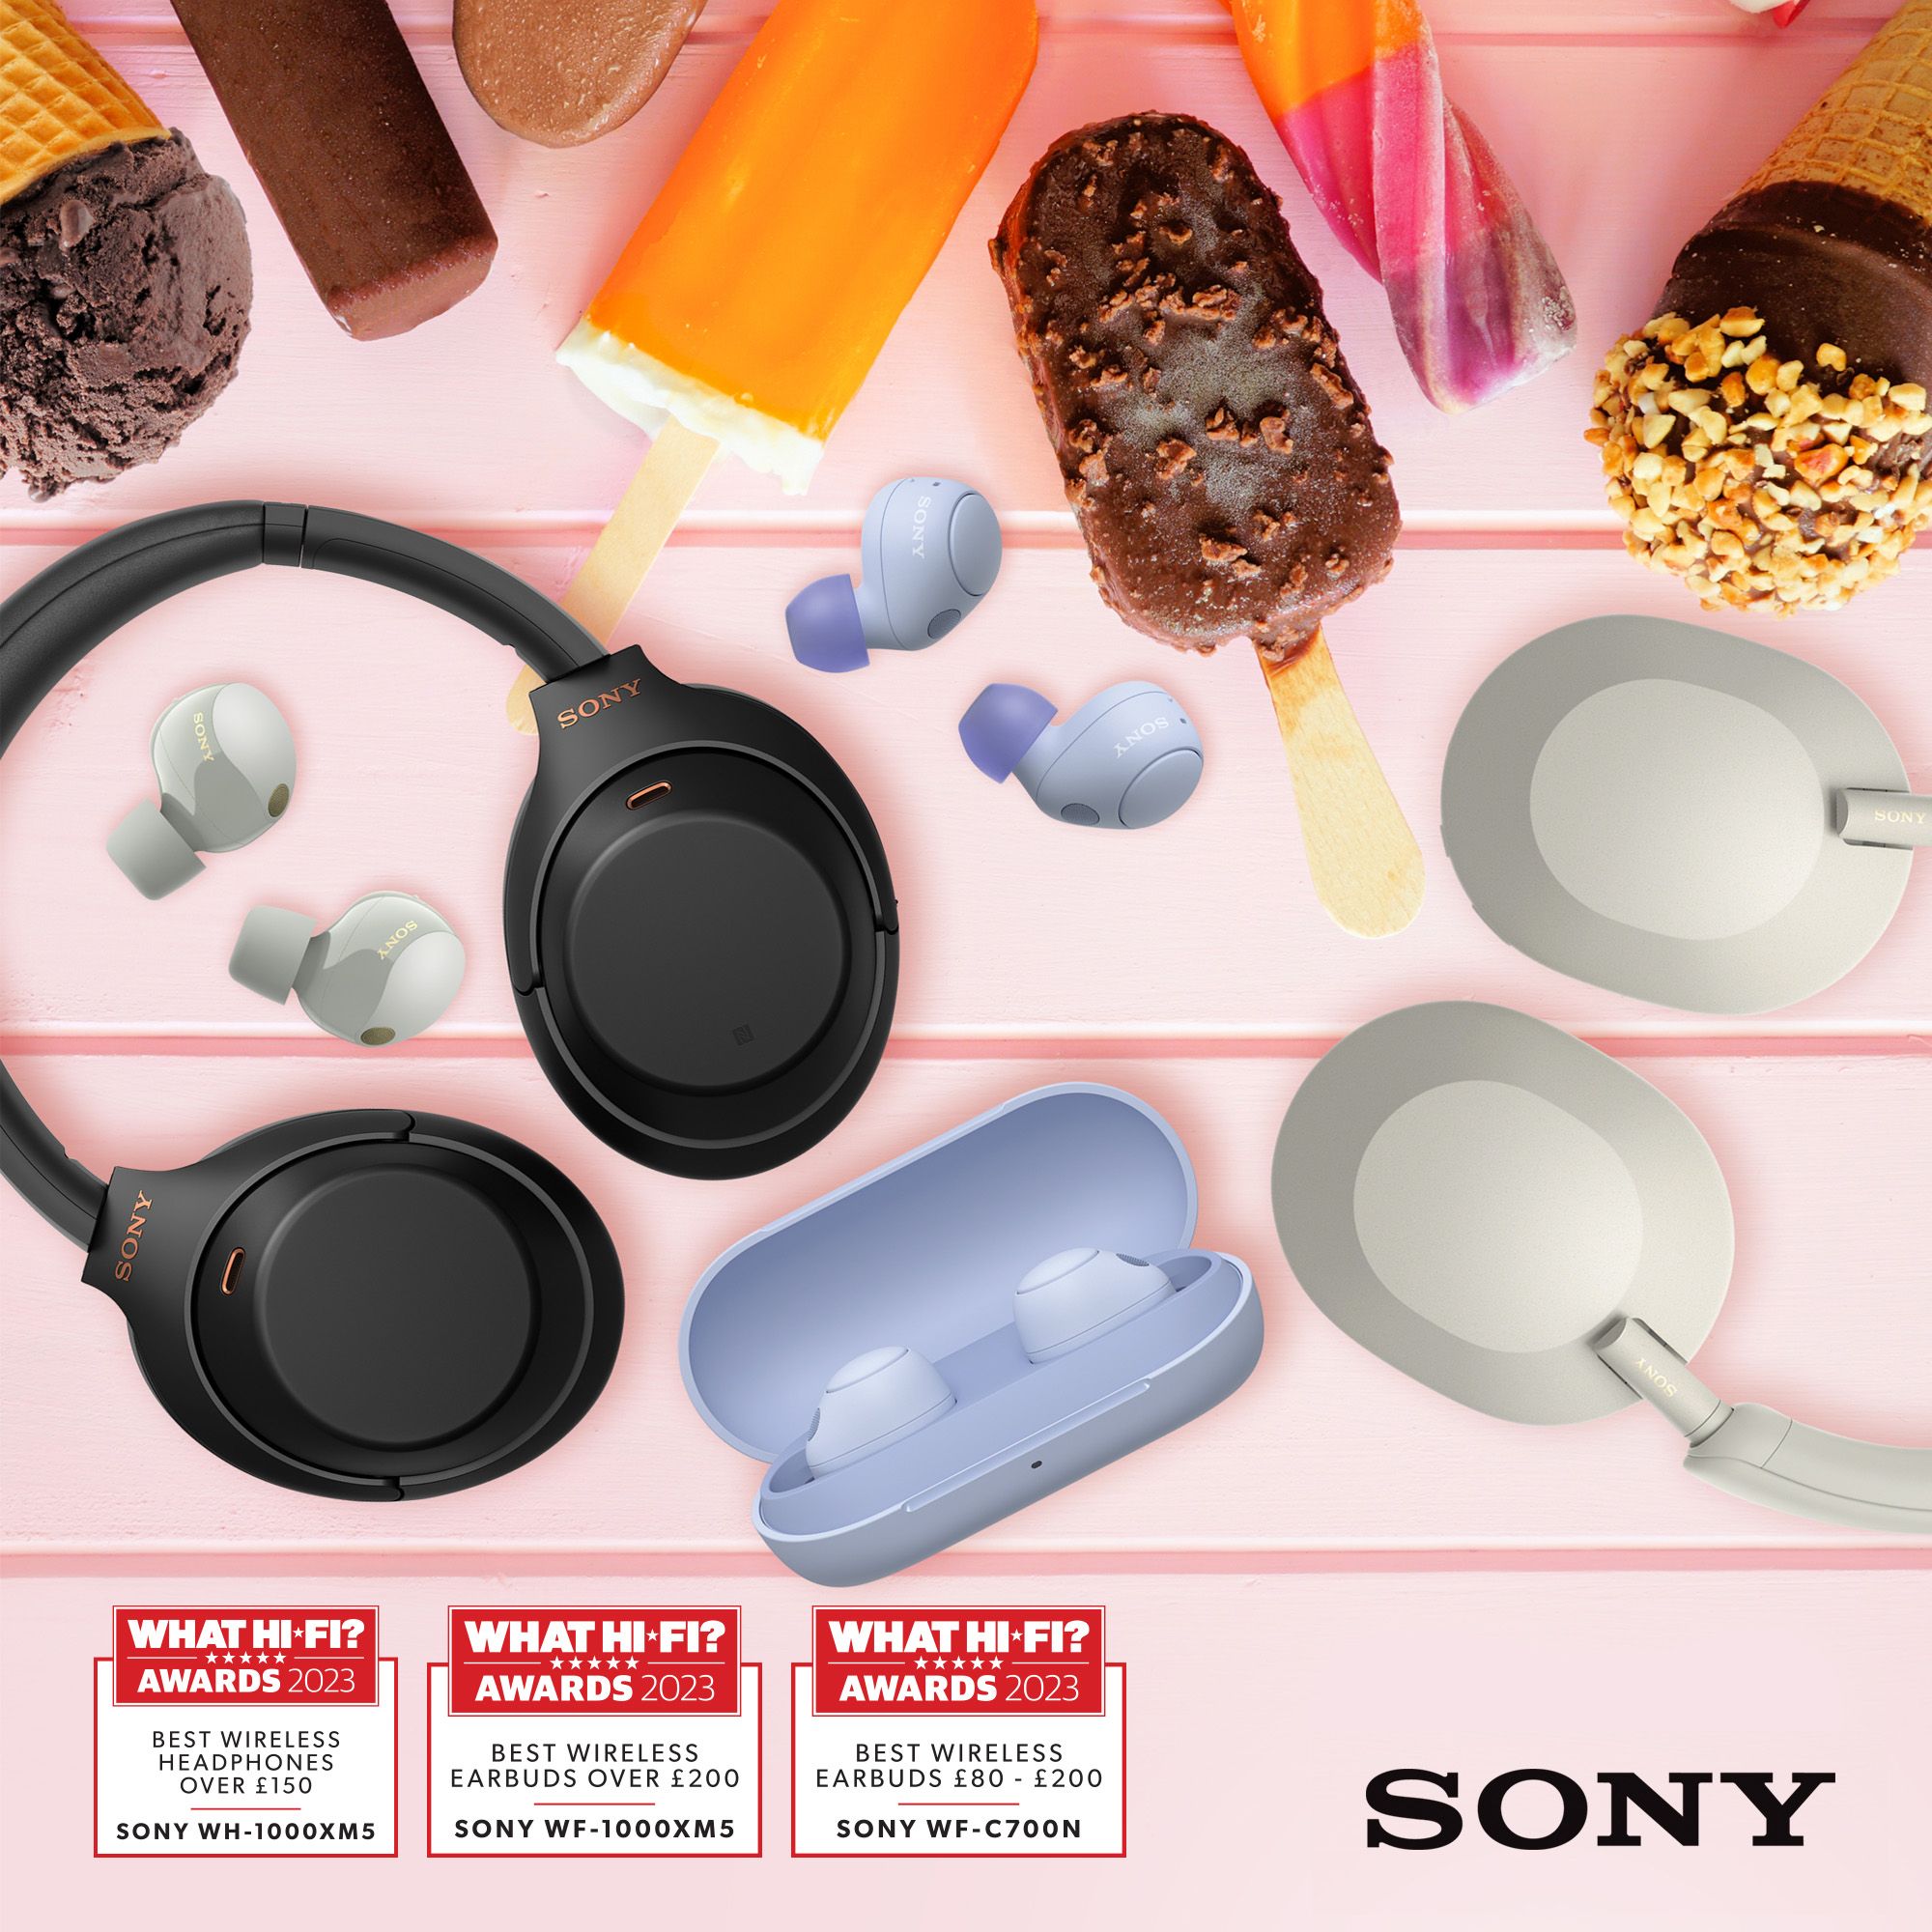 sony headphones and earbuds arranges ina flat lay on a yellow background, with coconut and pineapple decorations.